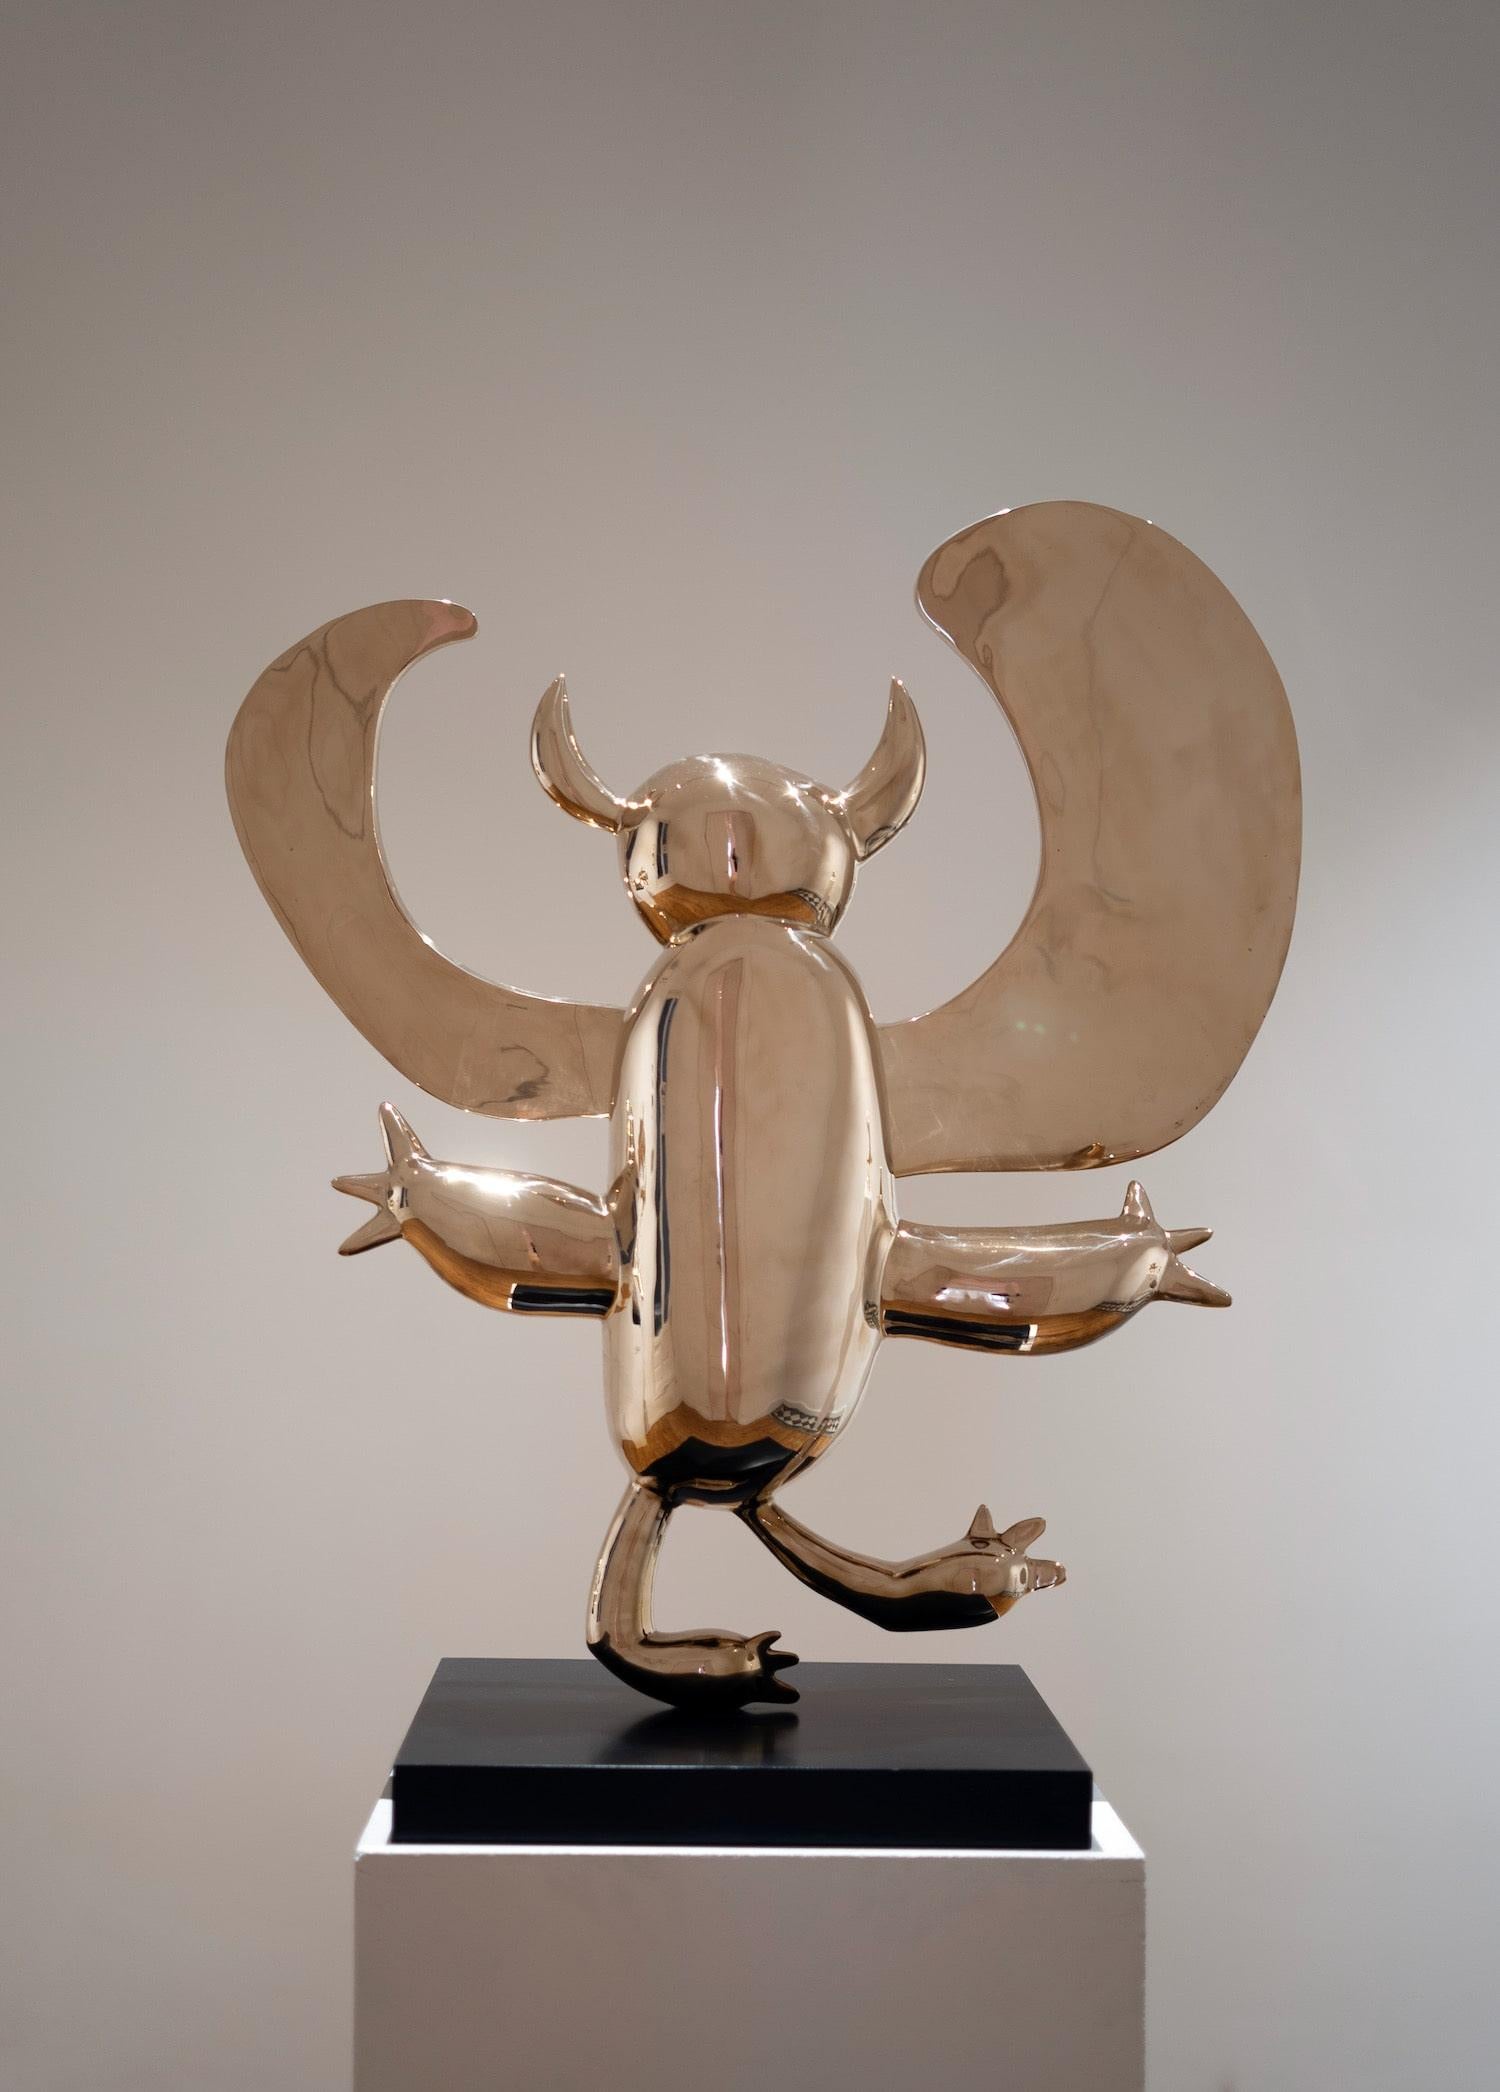 Winged Demon is a polished bronze sculpture by contemporary artist Marcelo Martin Burgos, dimensions are 92 × 79 × 45 cm (36.2 × 31.1 × 17.7 in). 
The sculpture is signed and numbered, it is part of a limited edition of 12 editions, and comes with a